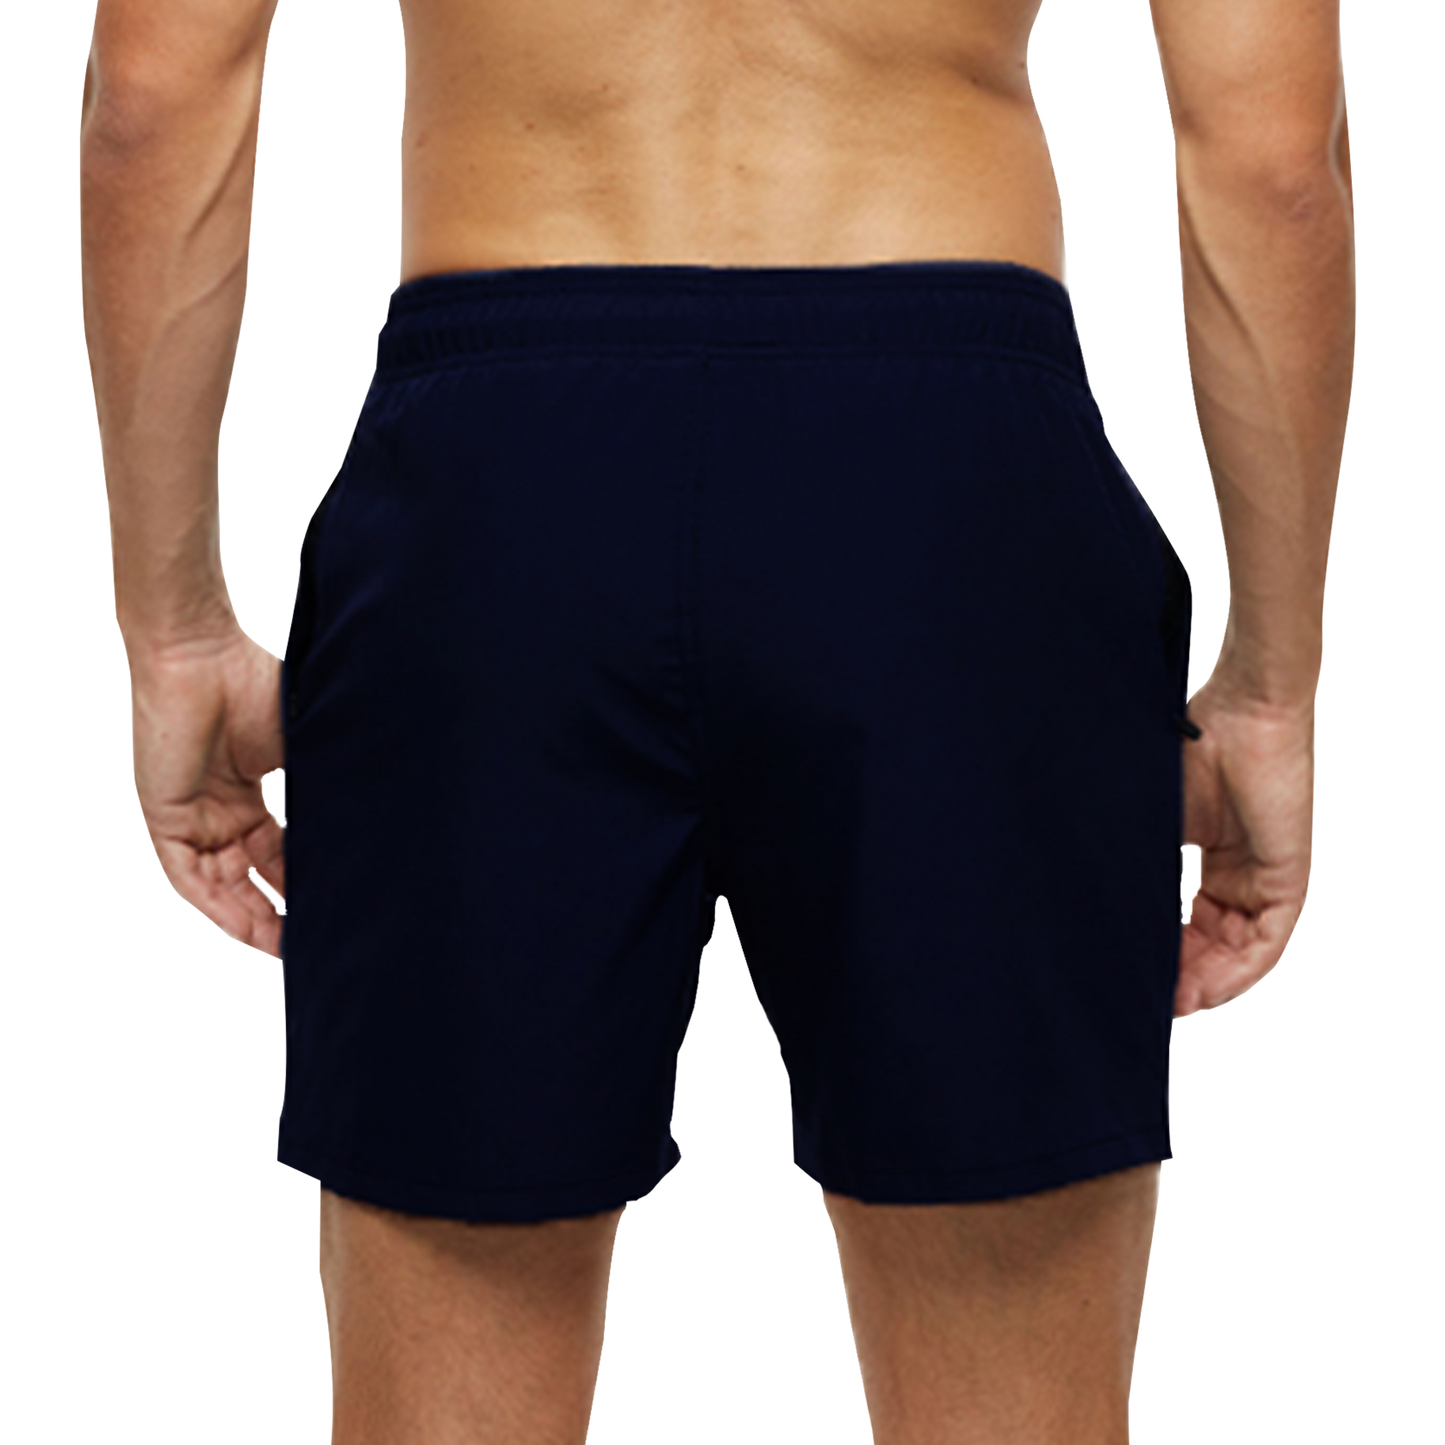 Navy Blue Men's Cotton Shorts for Running, Gym Workout, Fitness, Cycling Sporty Clad